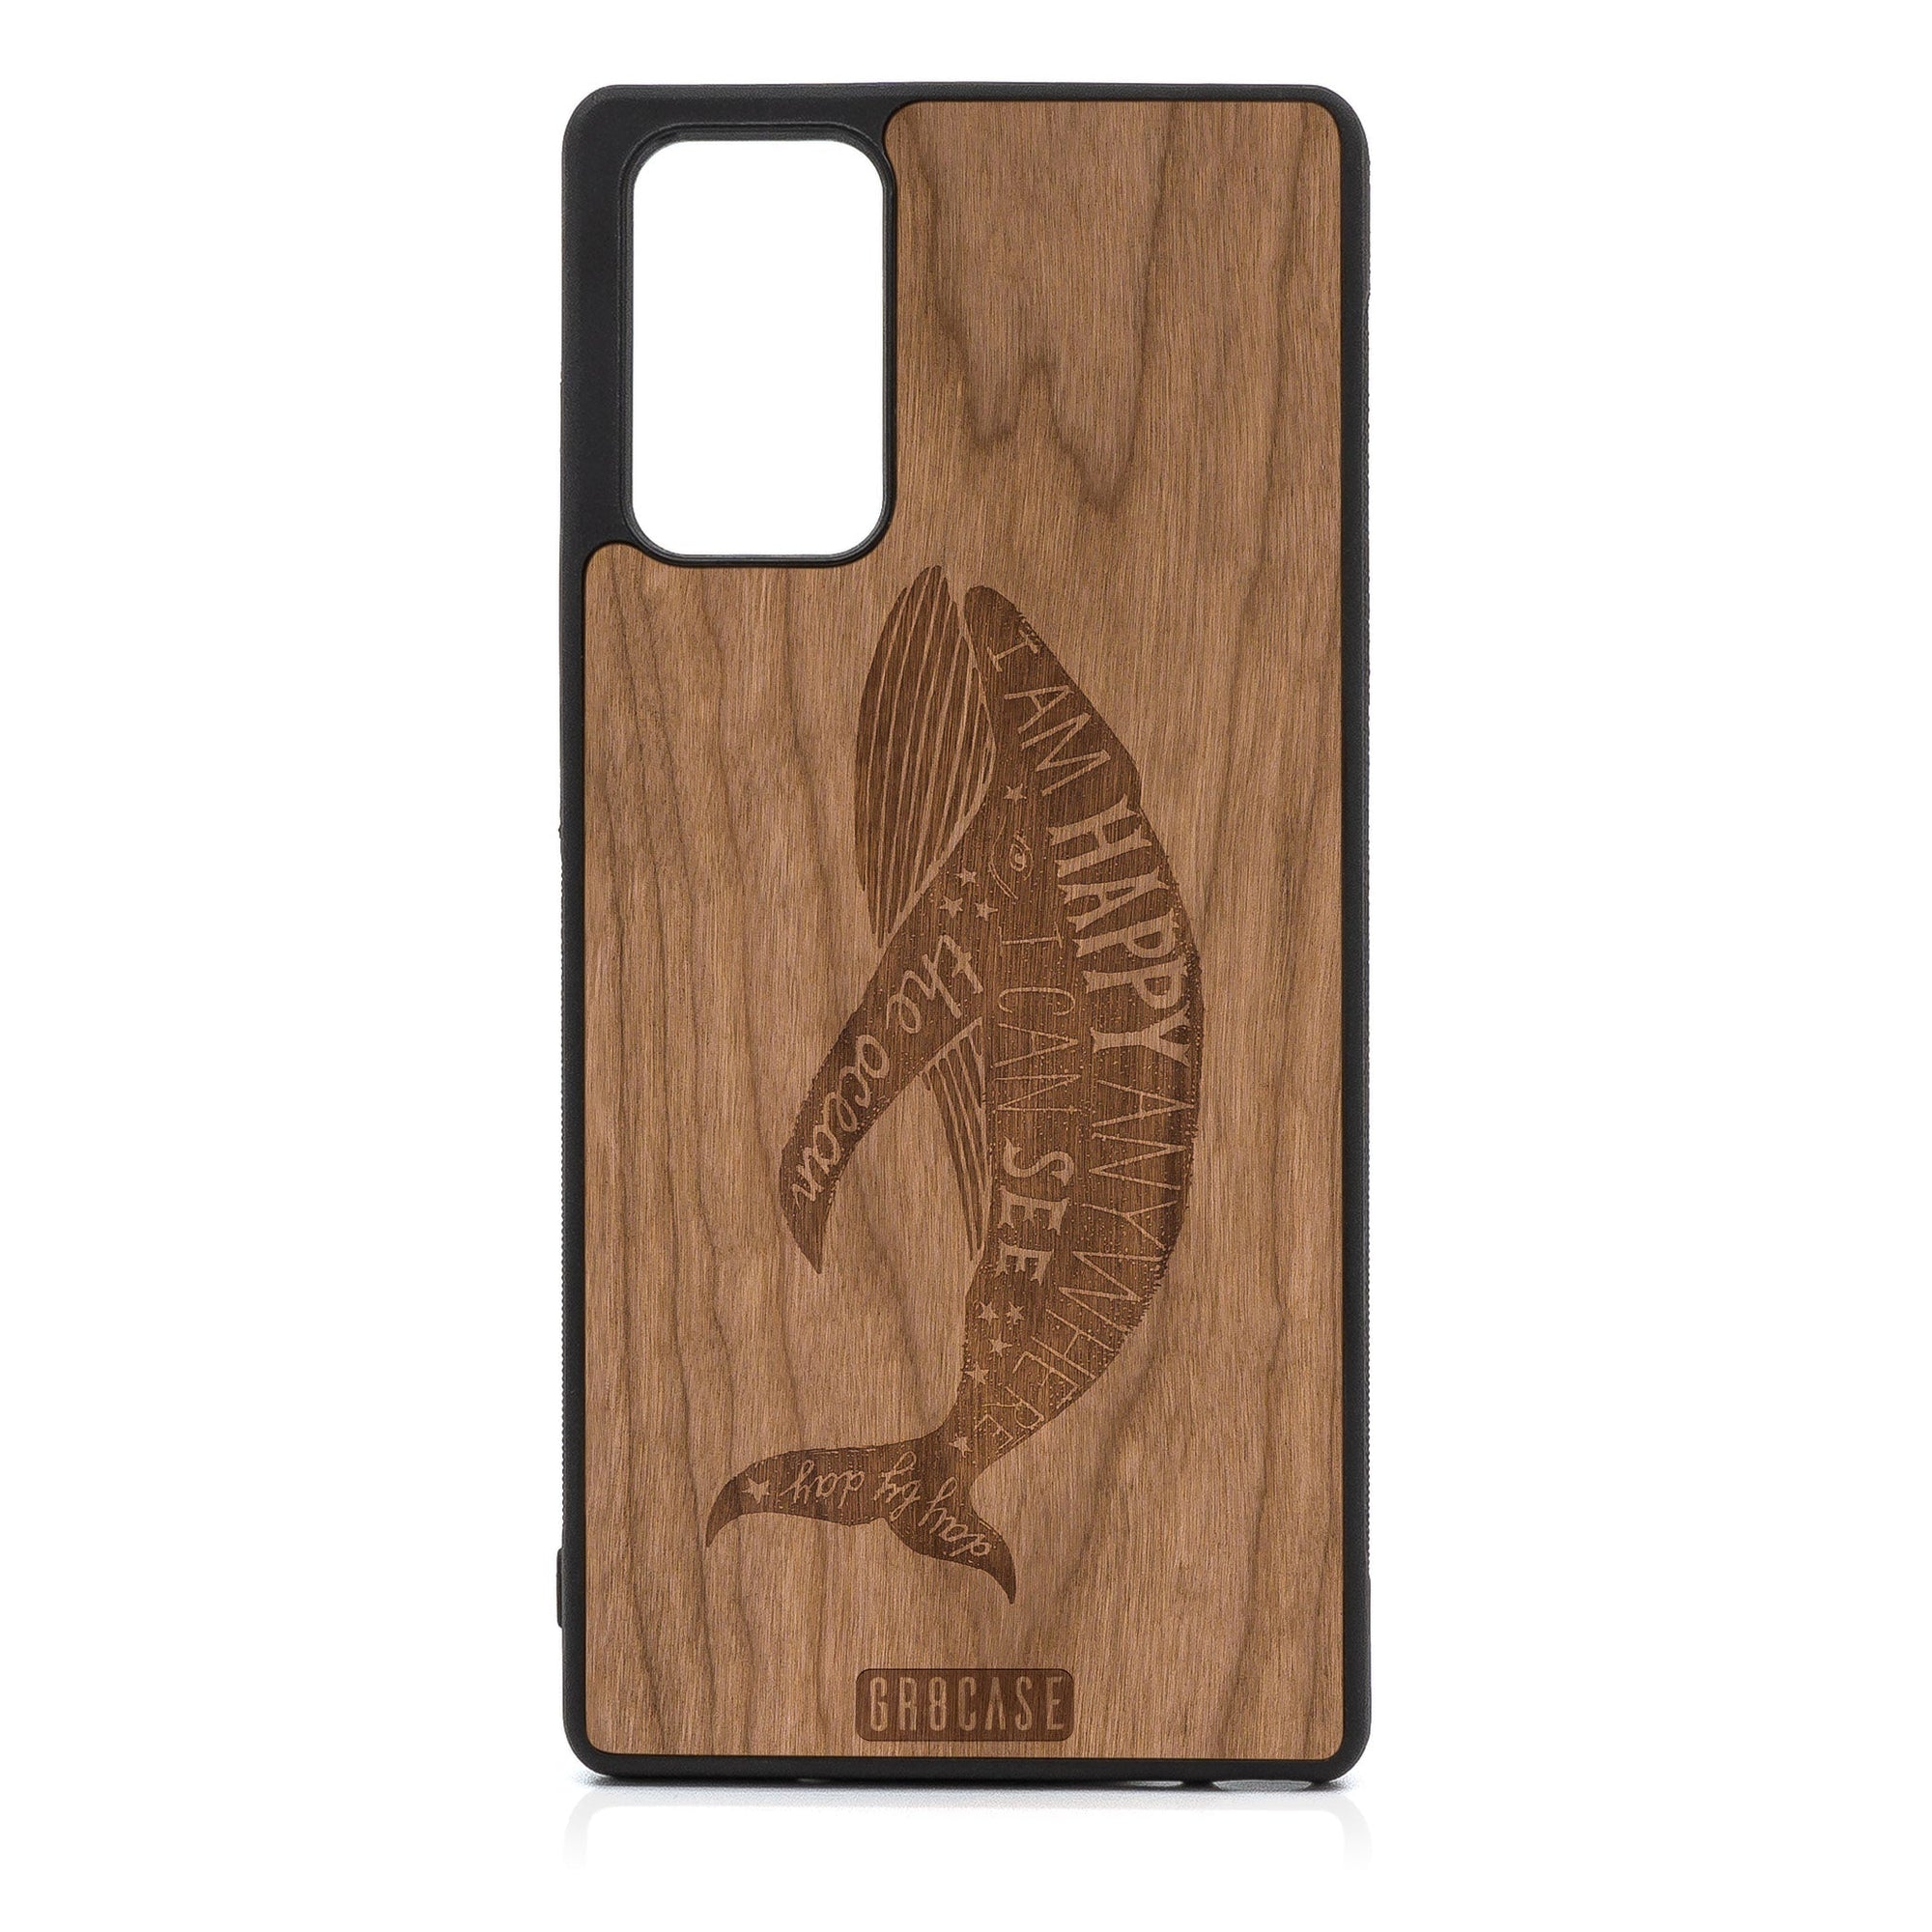 I'm Happy Anywhere I Can See The Ocean (Whale) Design Wood Case For Samsung Galaxy A72 5G